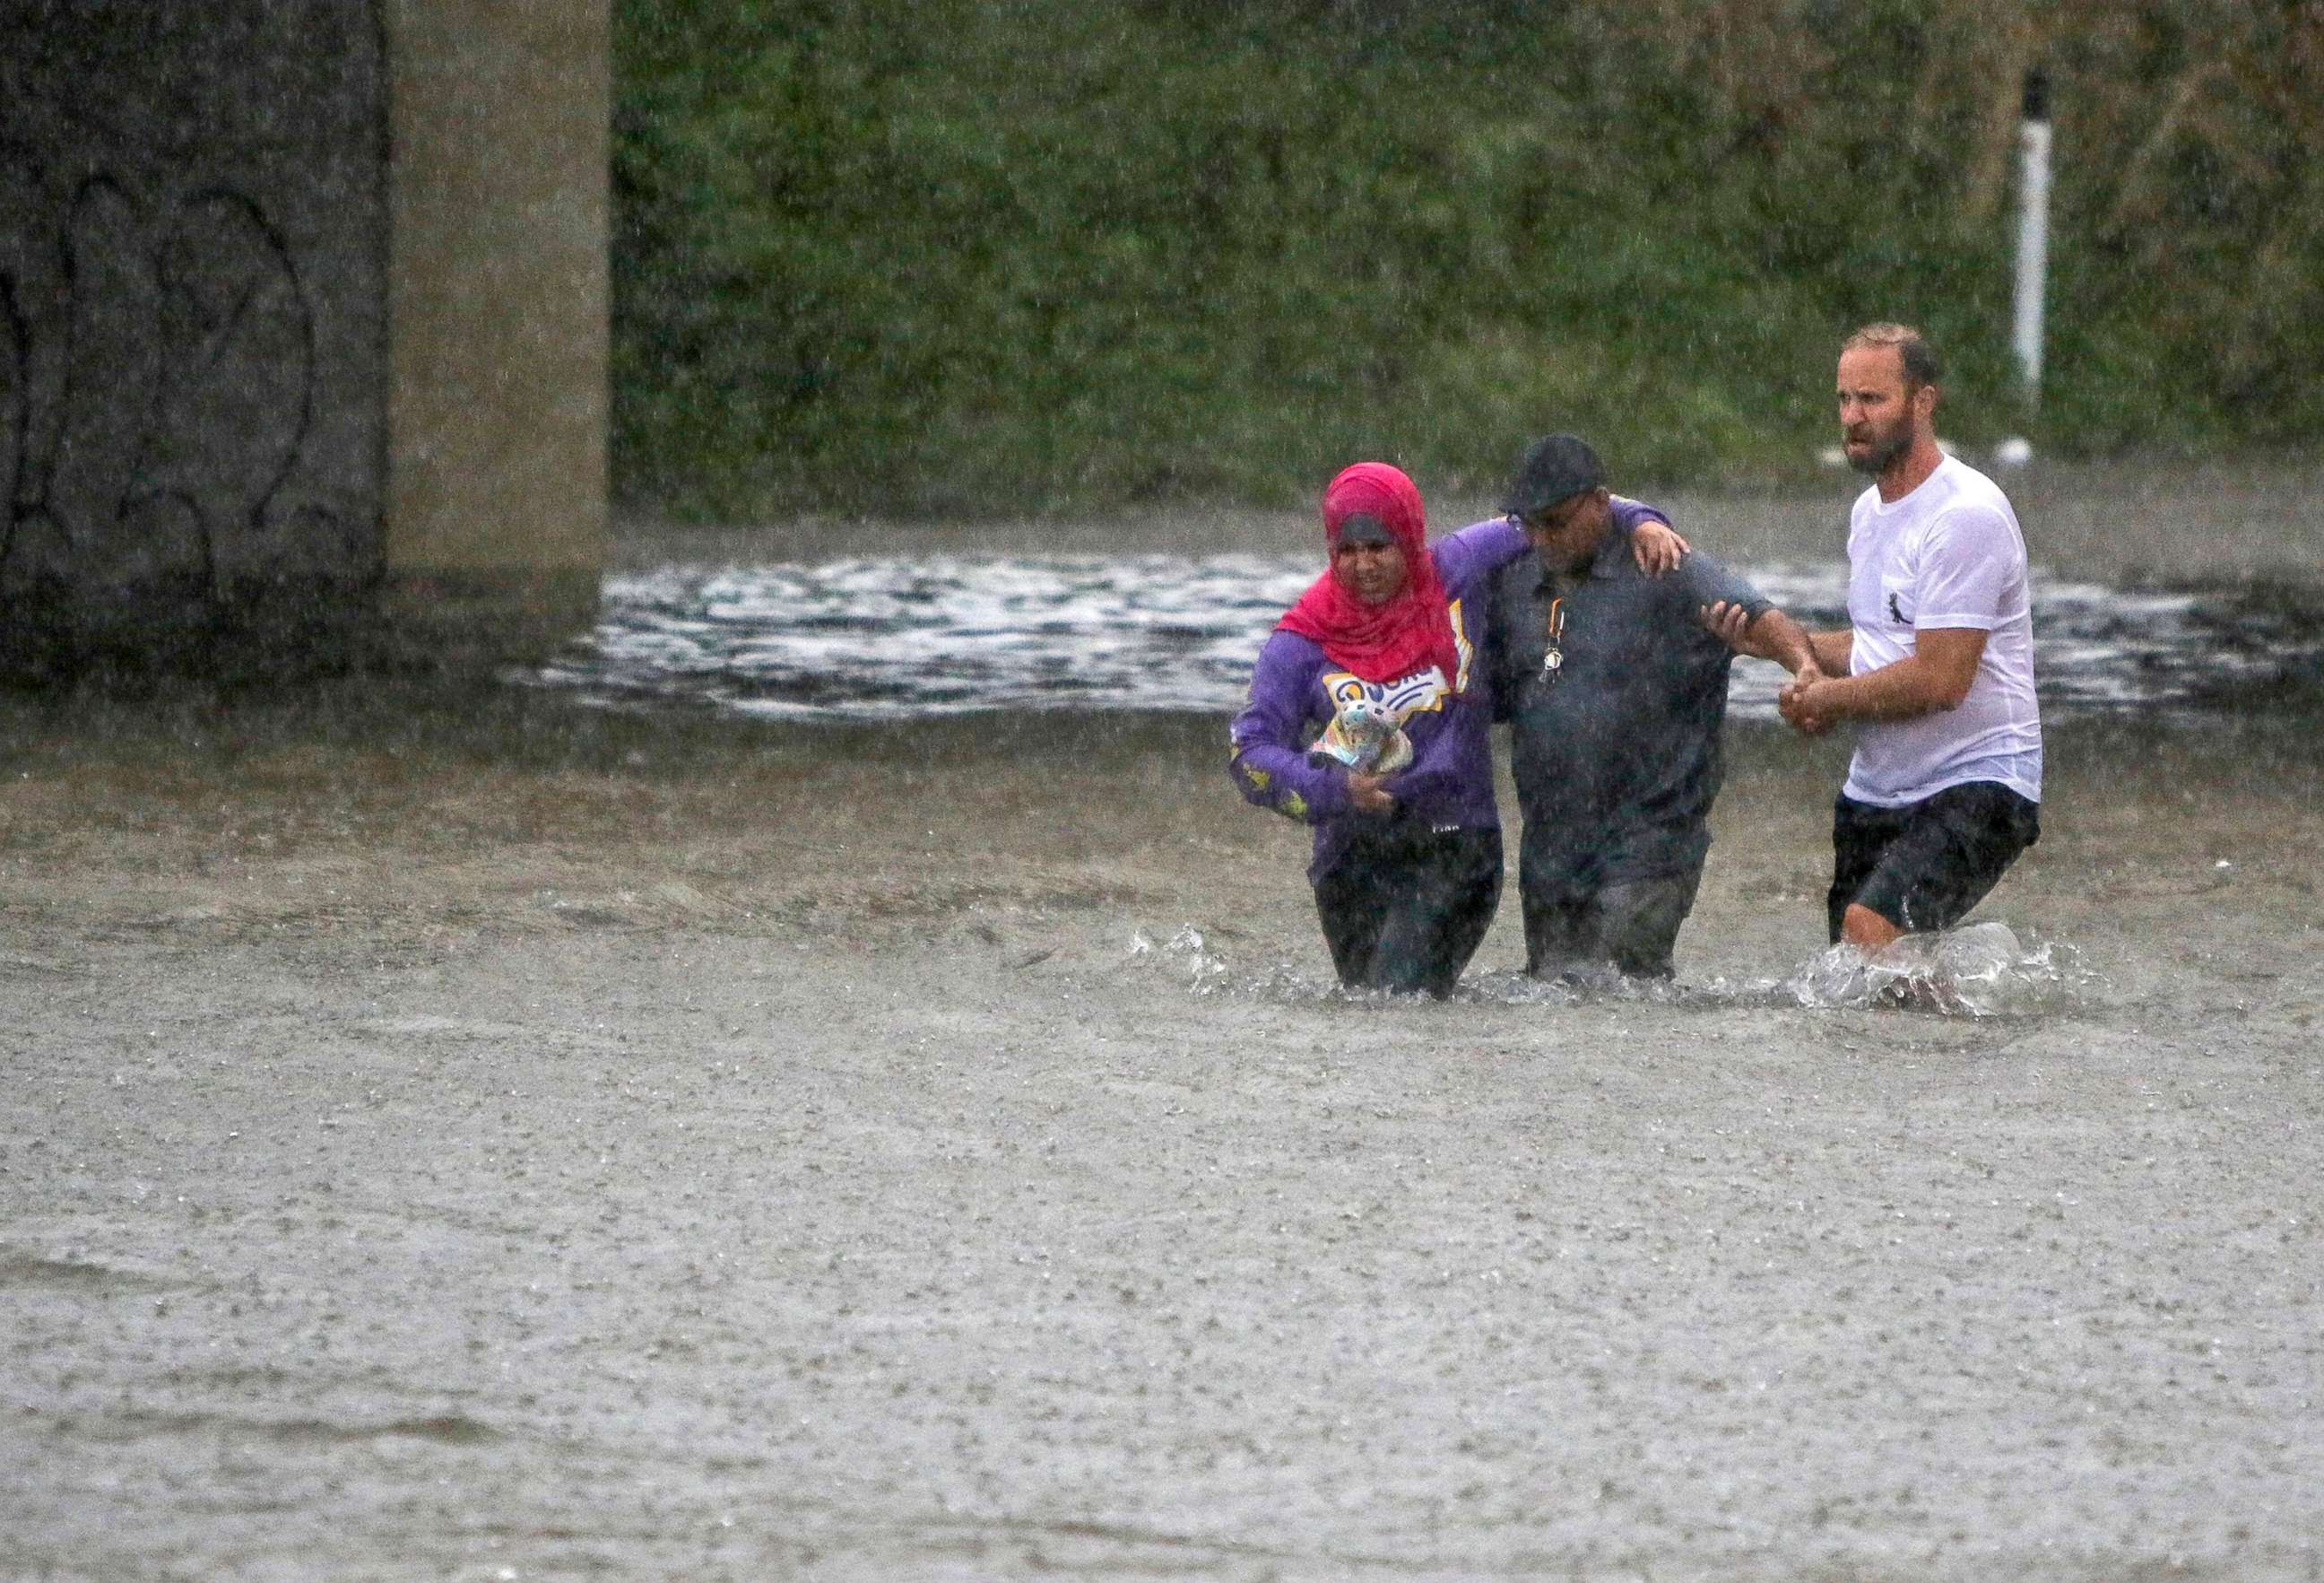 PHOTO: A man helps two people walk through flood water after their car got stuck in St. Louis, Mo., July 28, 2022.